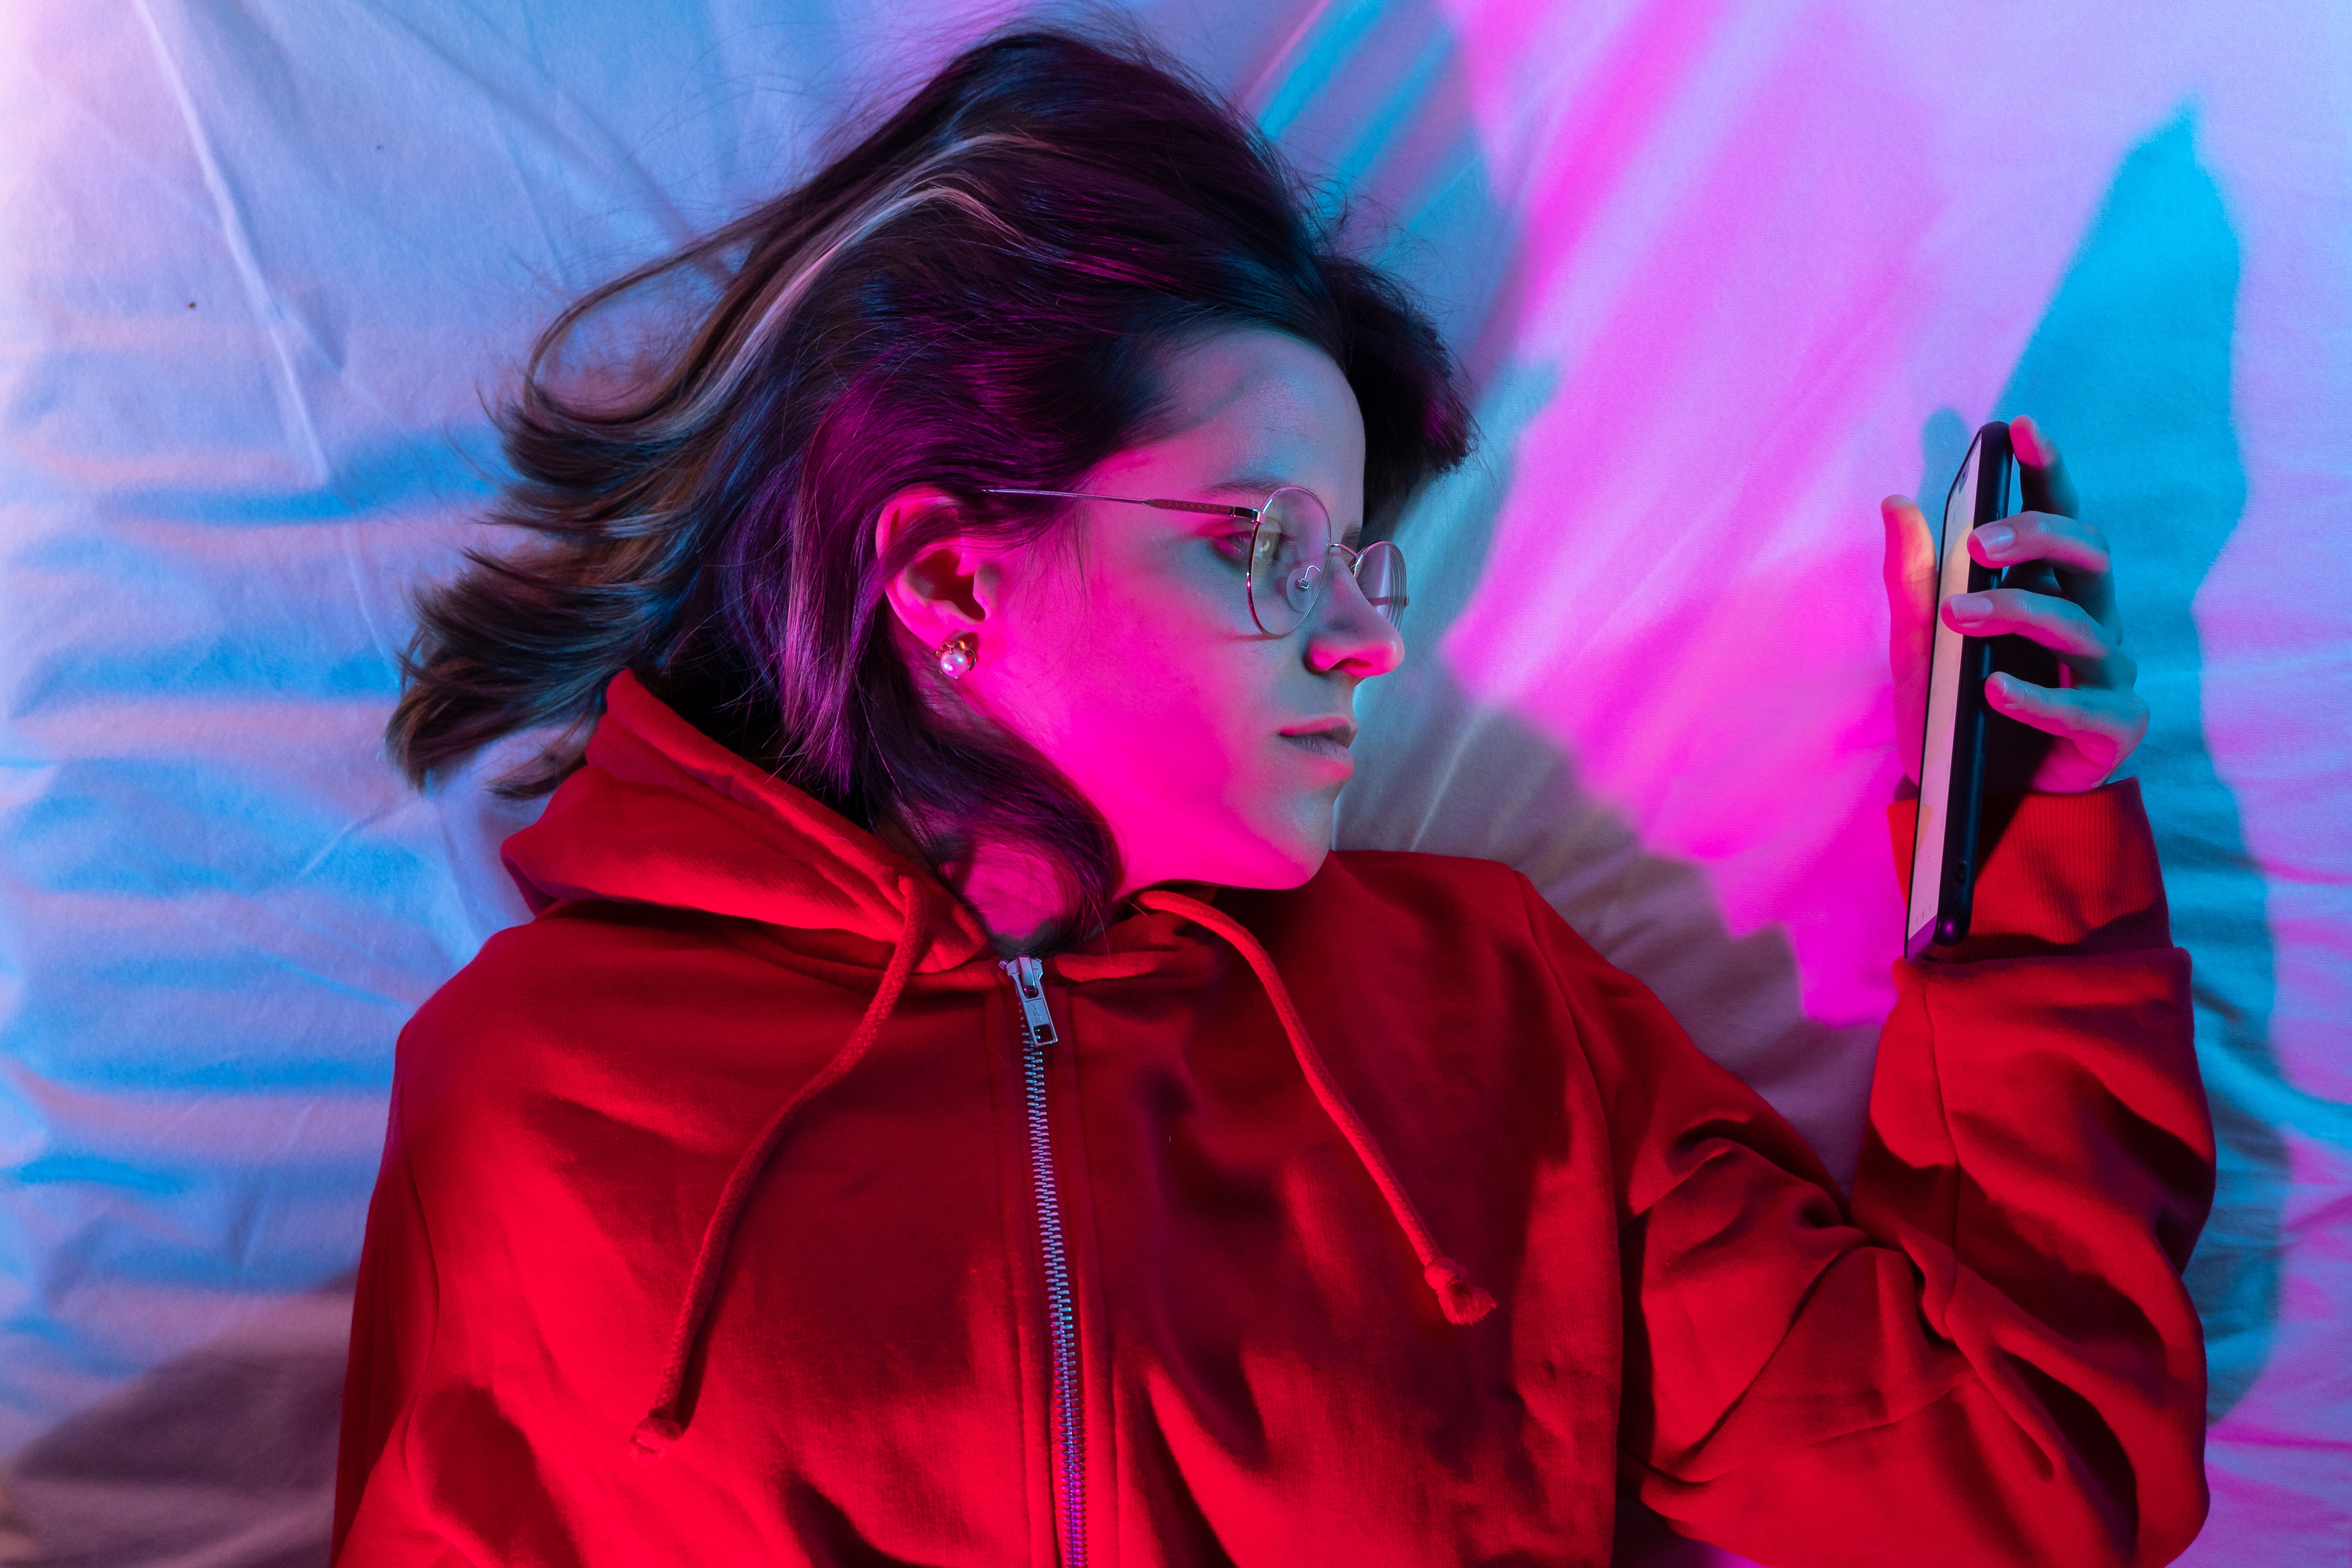 Young girl looking her smart phone doom scrolling on bed in the middle of the night | Source: Shutterstock.com